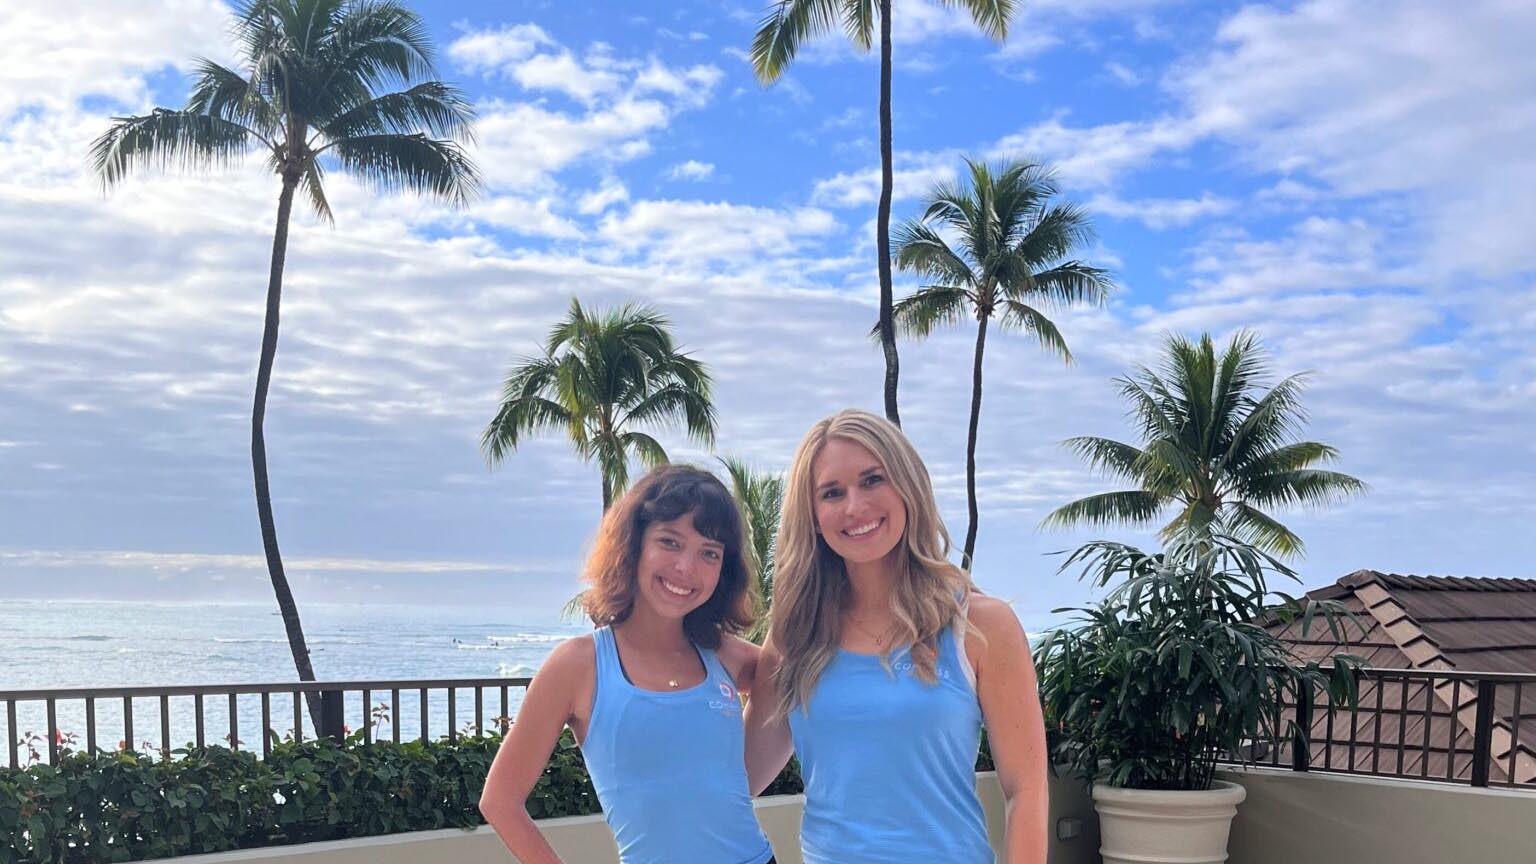 How to support women in the workplace: Two people smiling on a sunny balcony with palm trees, a glimpse of the ocean, and tropical foliage under a partly cloudy sky. They're wearing matching blue tops.